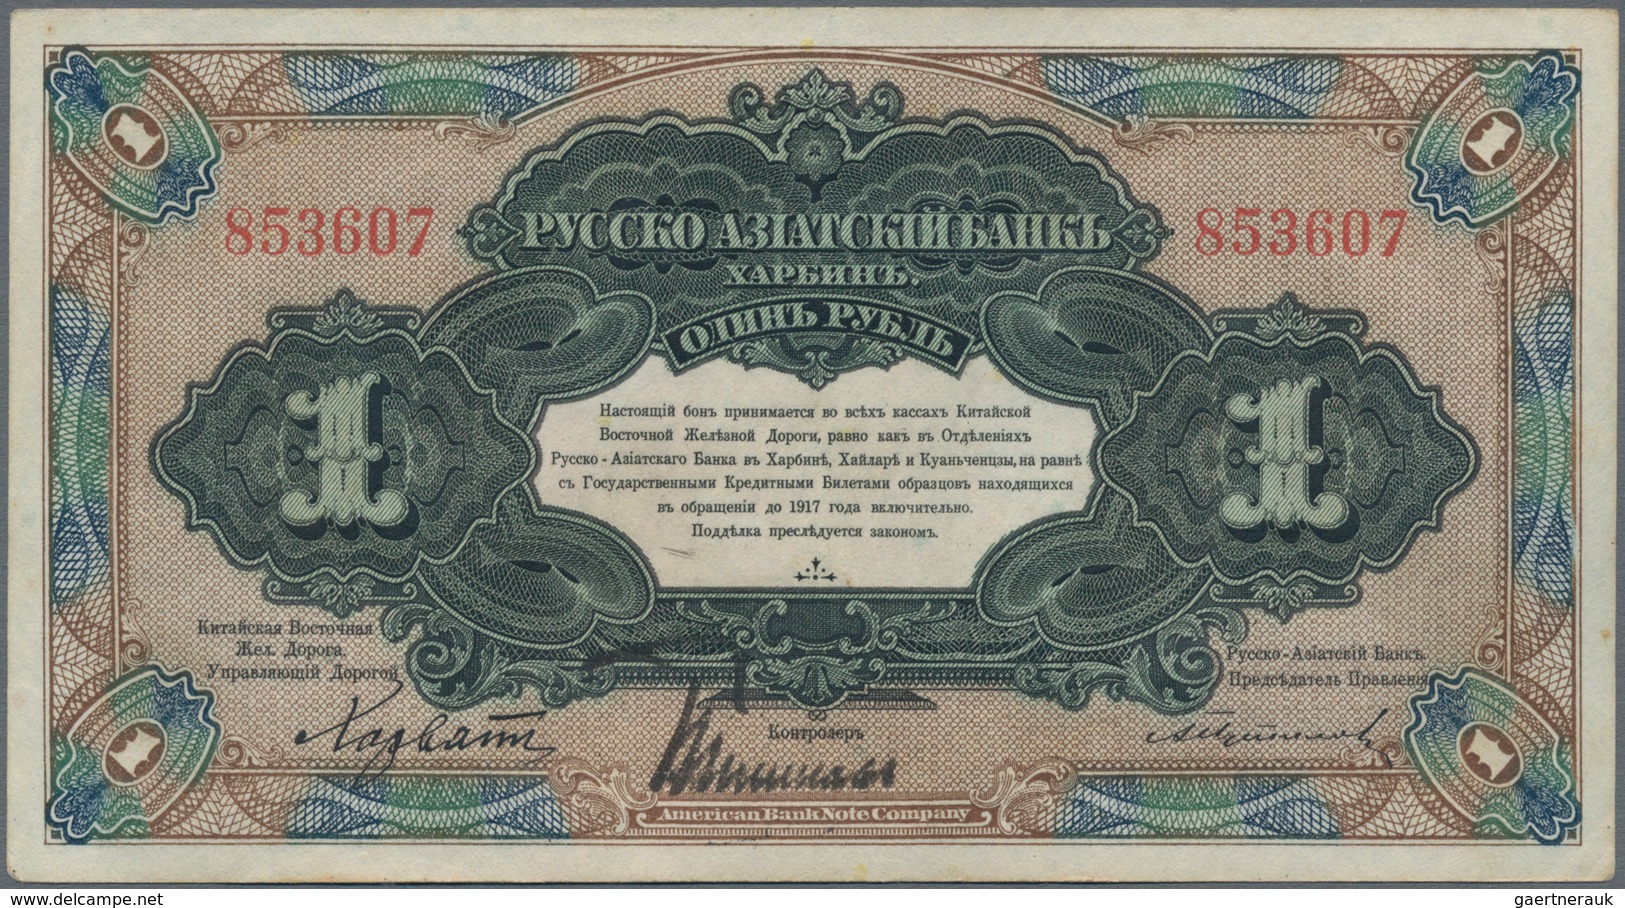 China: Set With 5 Banknotes Of The 1 Ruble Russo-Asiatic Bank HARBIN Branch ND(1917), P.S474, All In - China